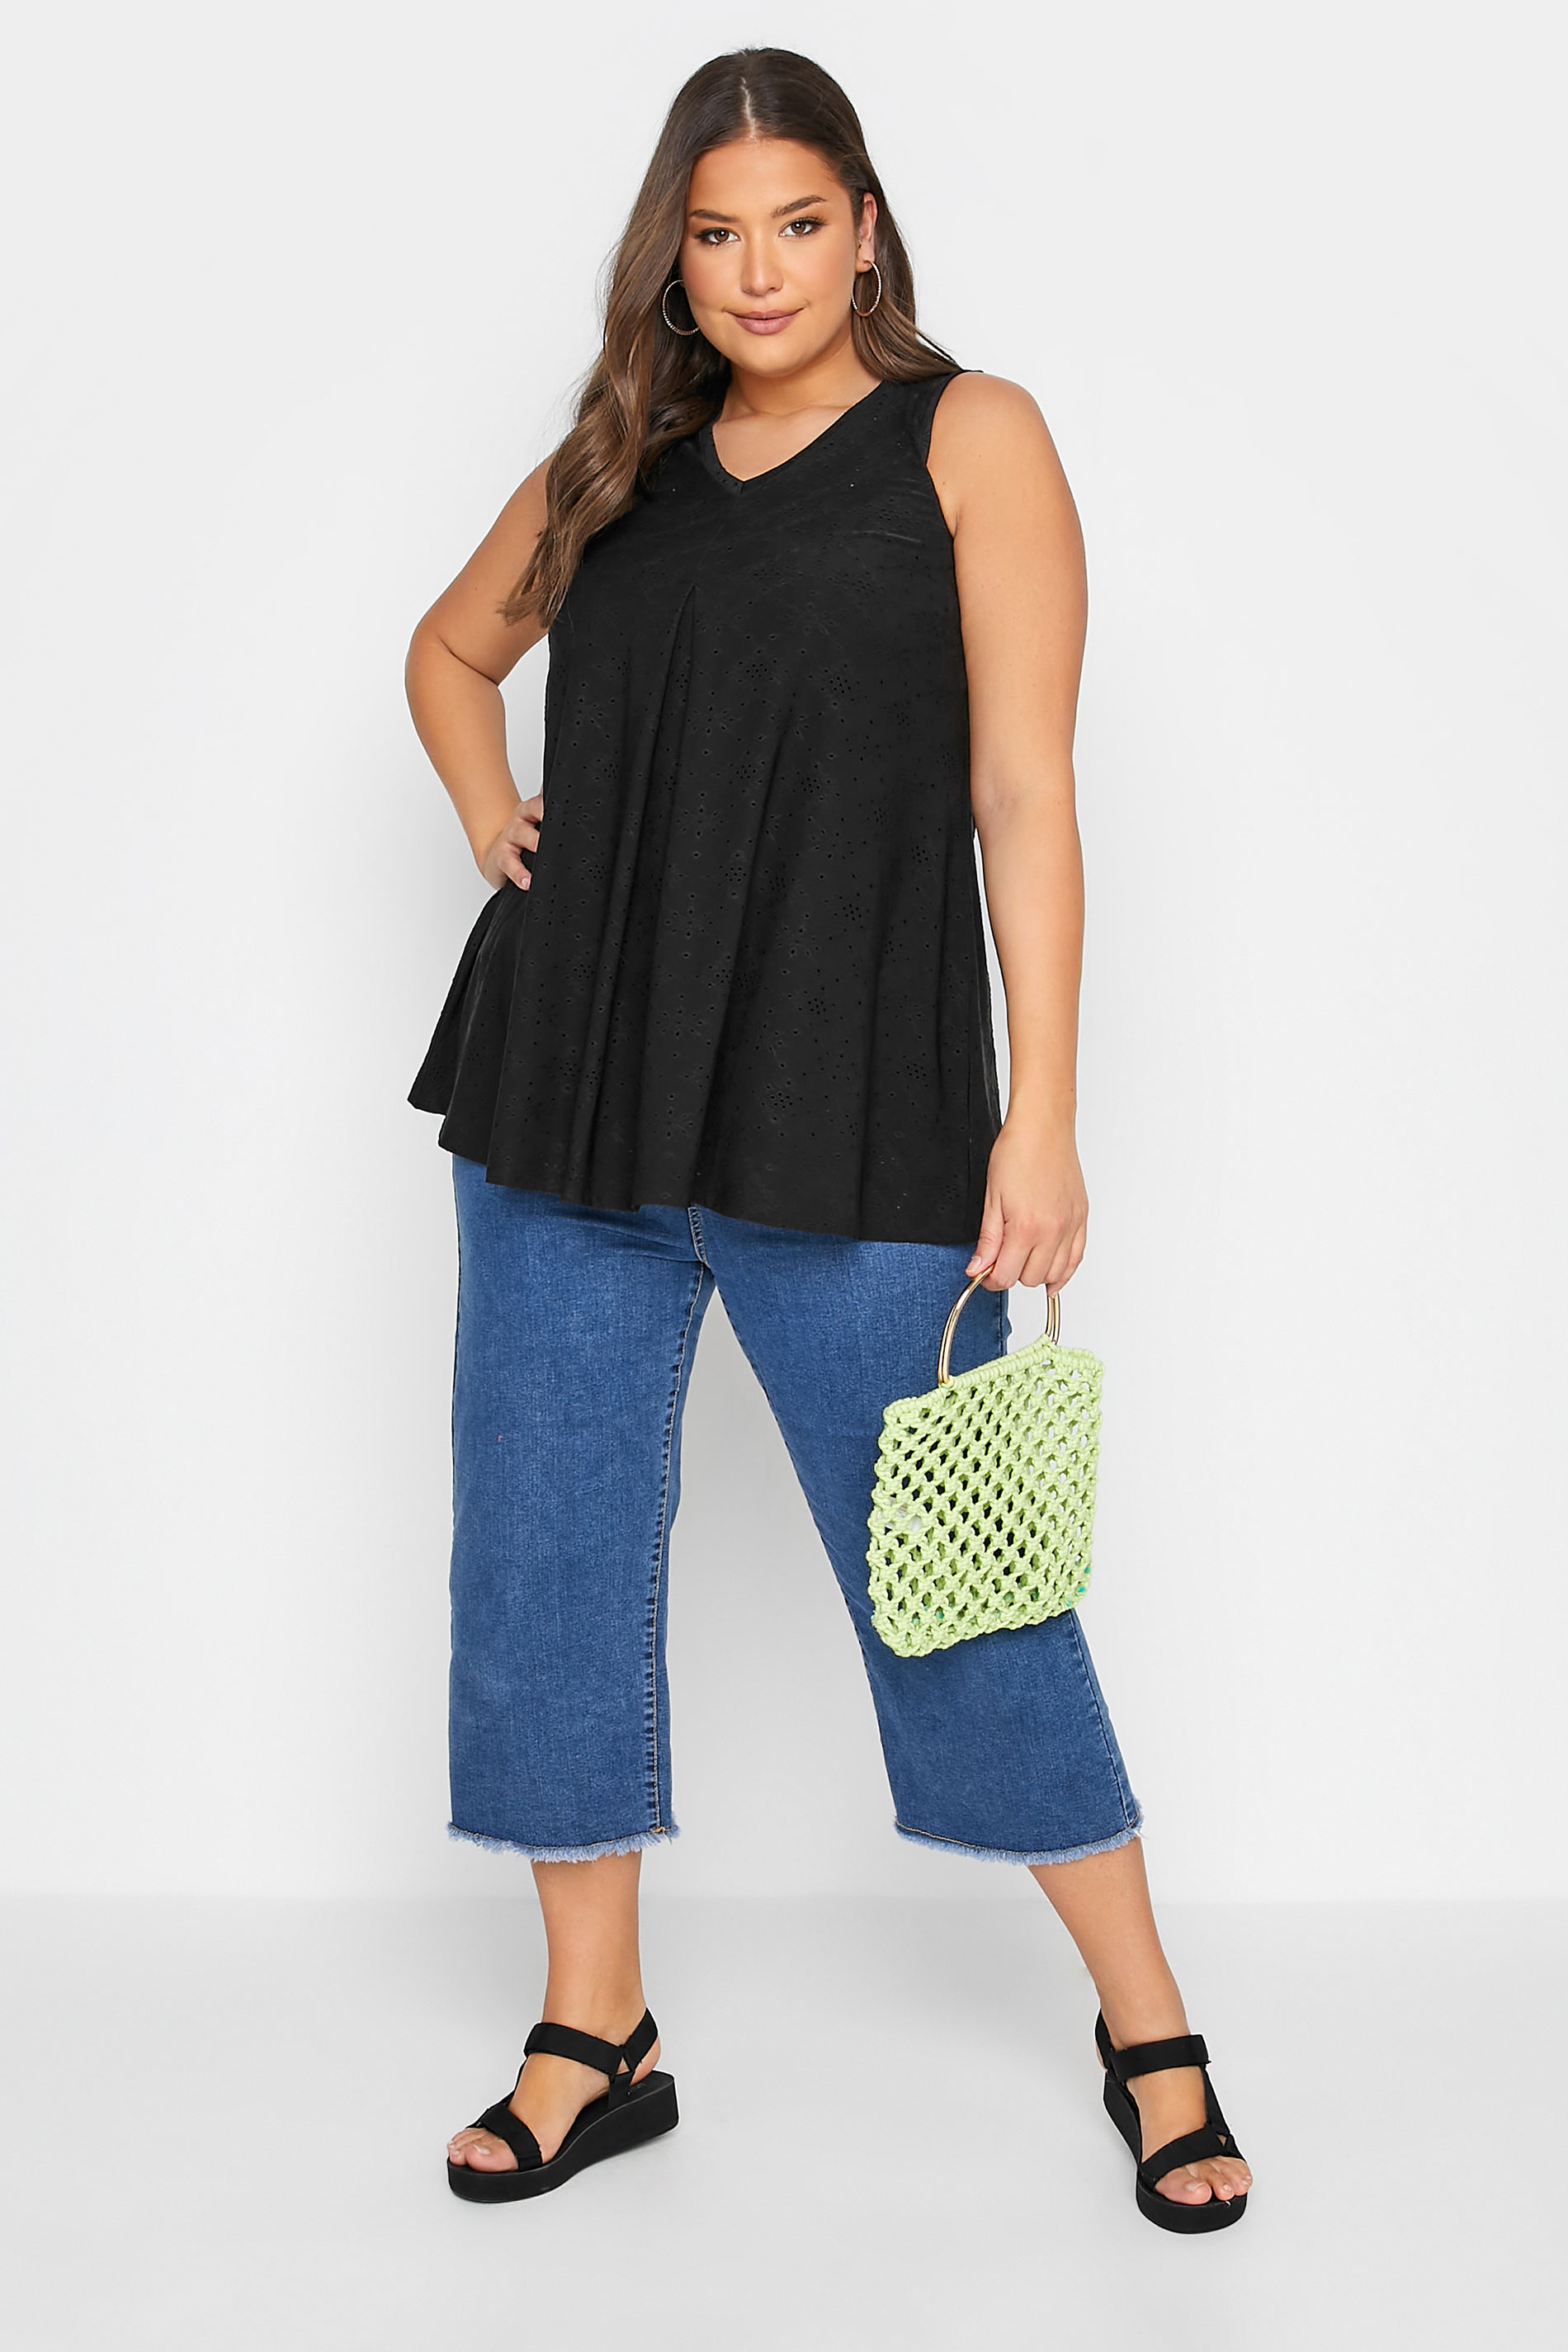 Grande taille  Tops Grande taille  Tops Jersey | Top Volanté Noir Broderie Anglaise - YH26764